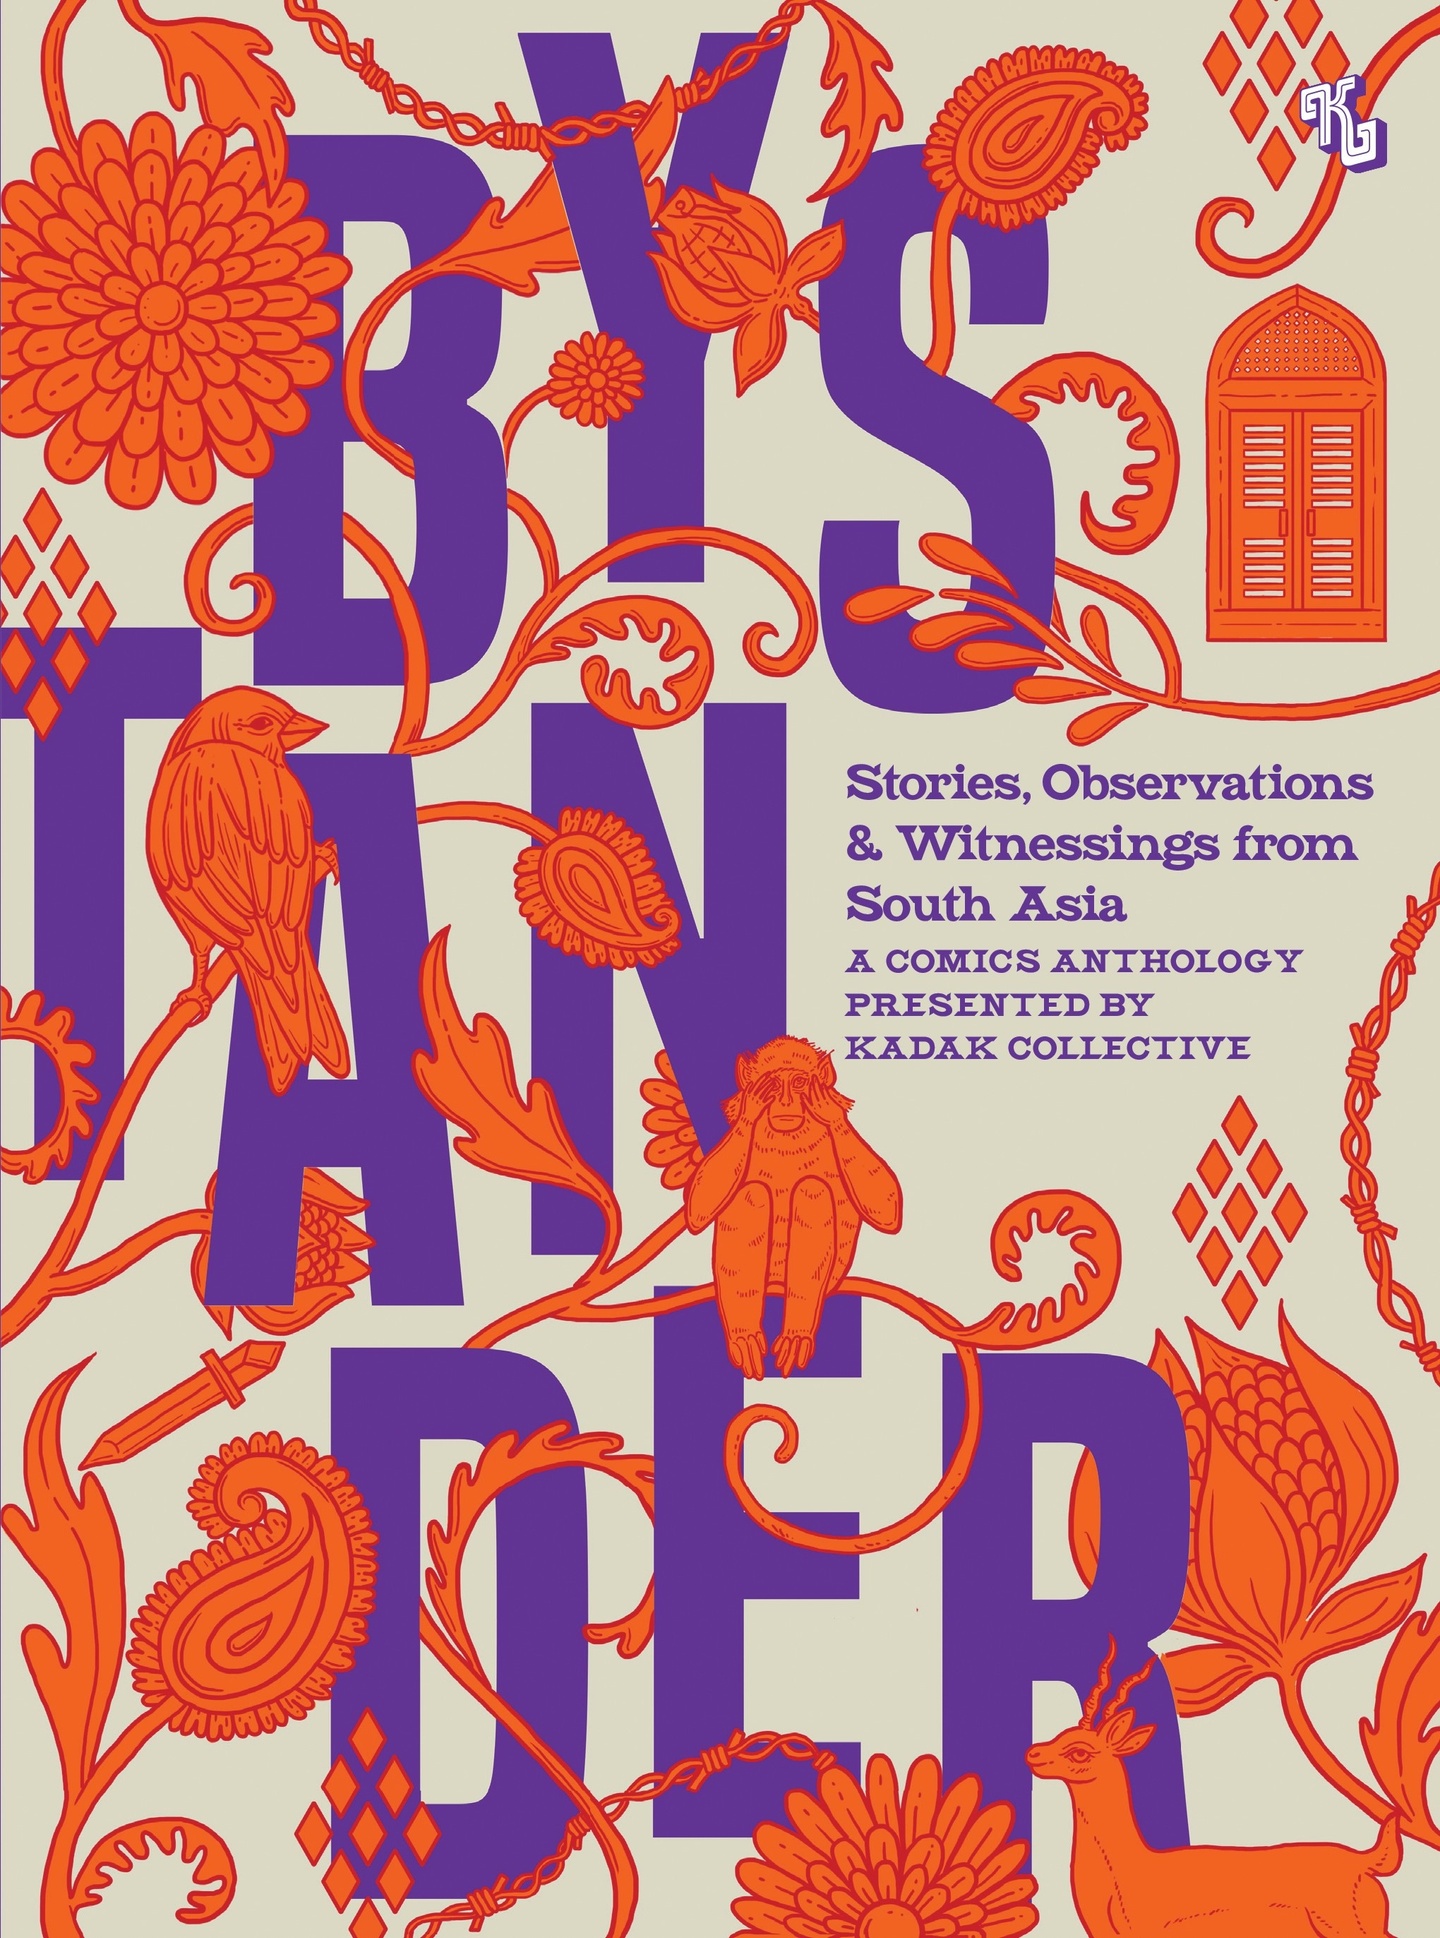 Book cover that features large, purple block type spelling Bystander, the letters split across three rows. Meandering around the type is a bright orange and red vine sprouting flowers, leaves, birds, and people.